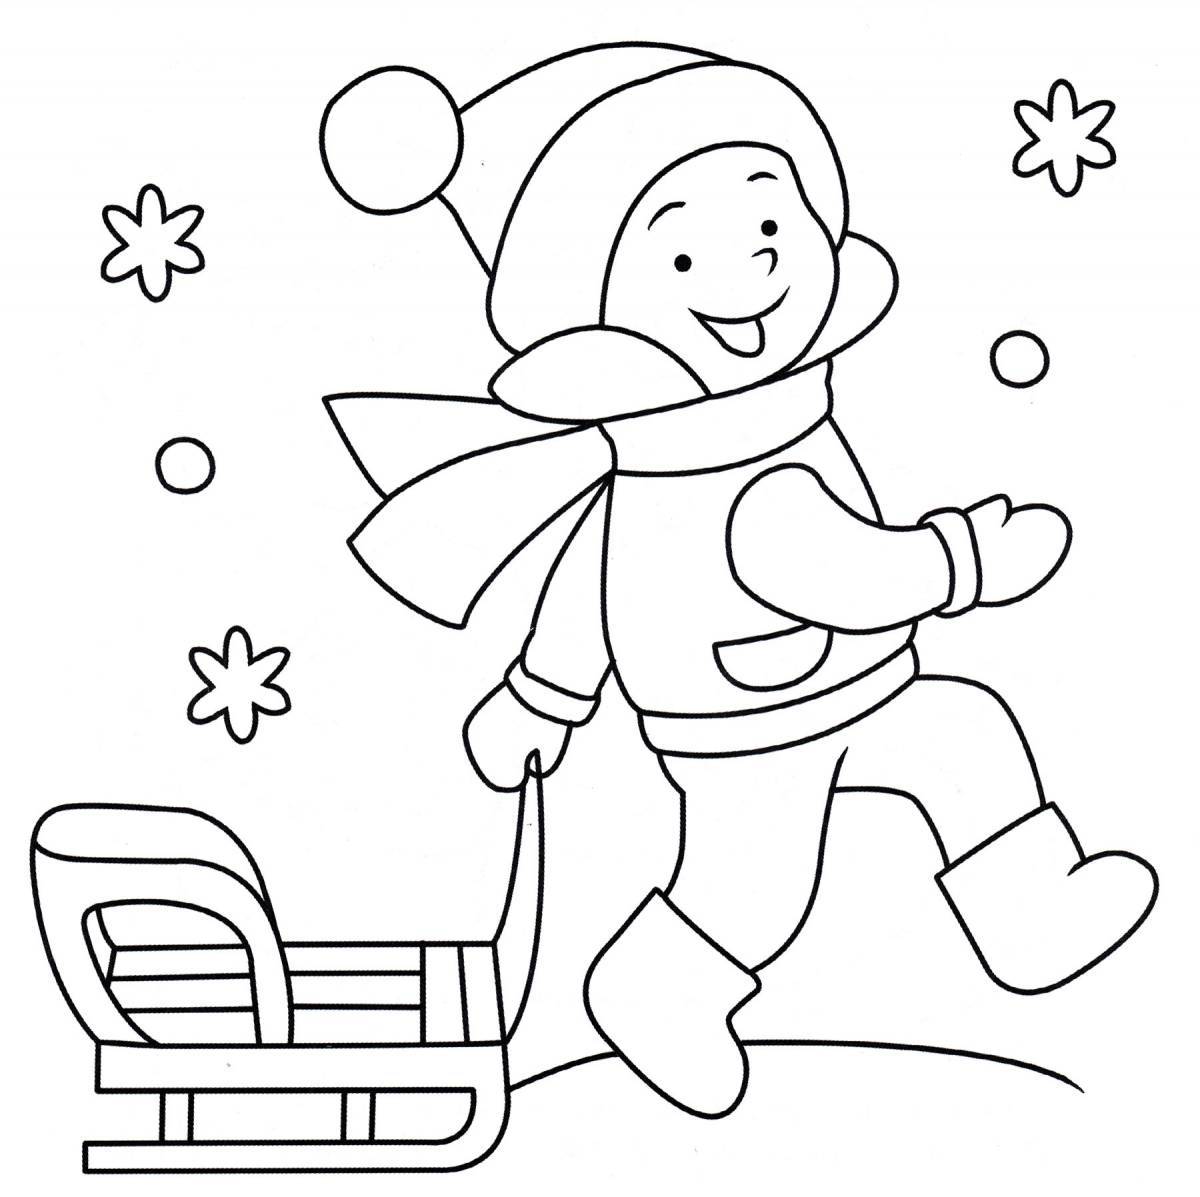 Delightful winter coloring book for children 4-5 years old